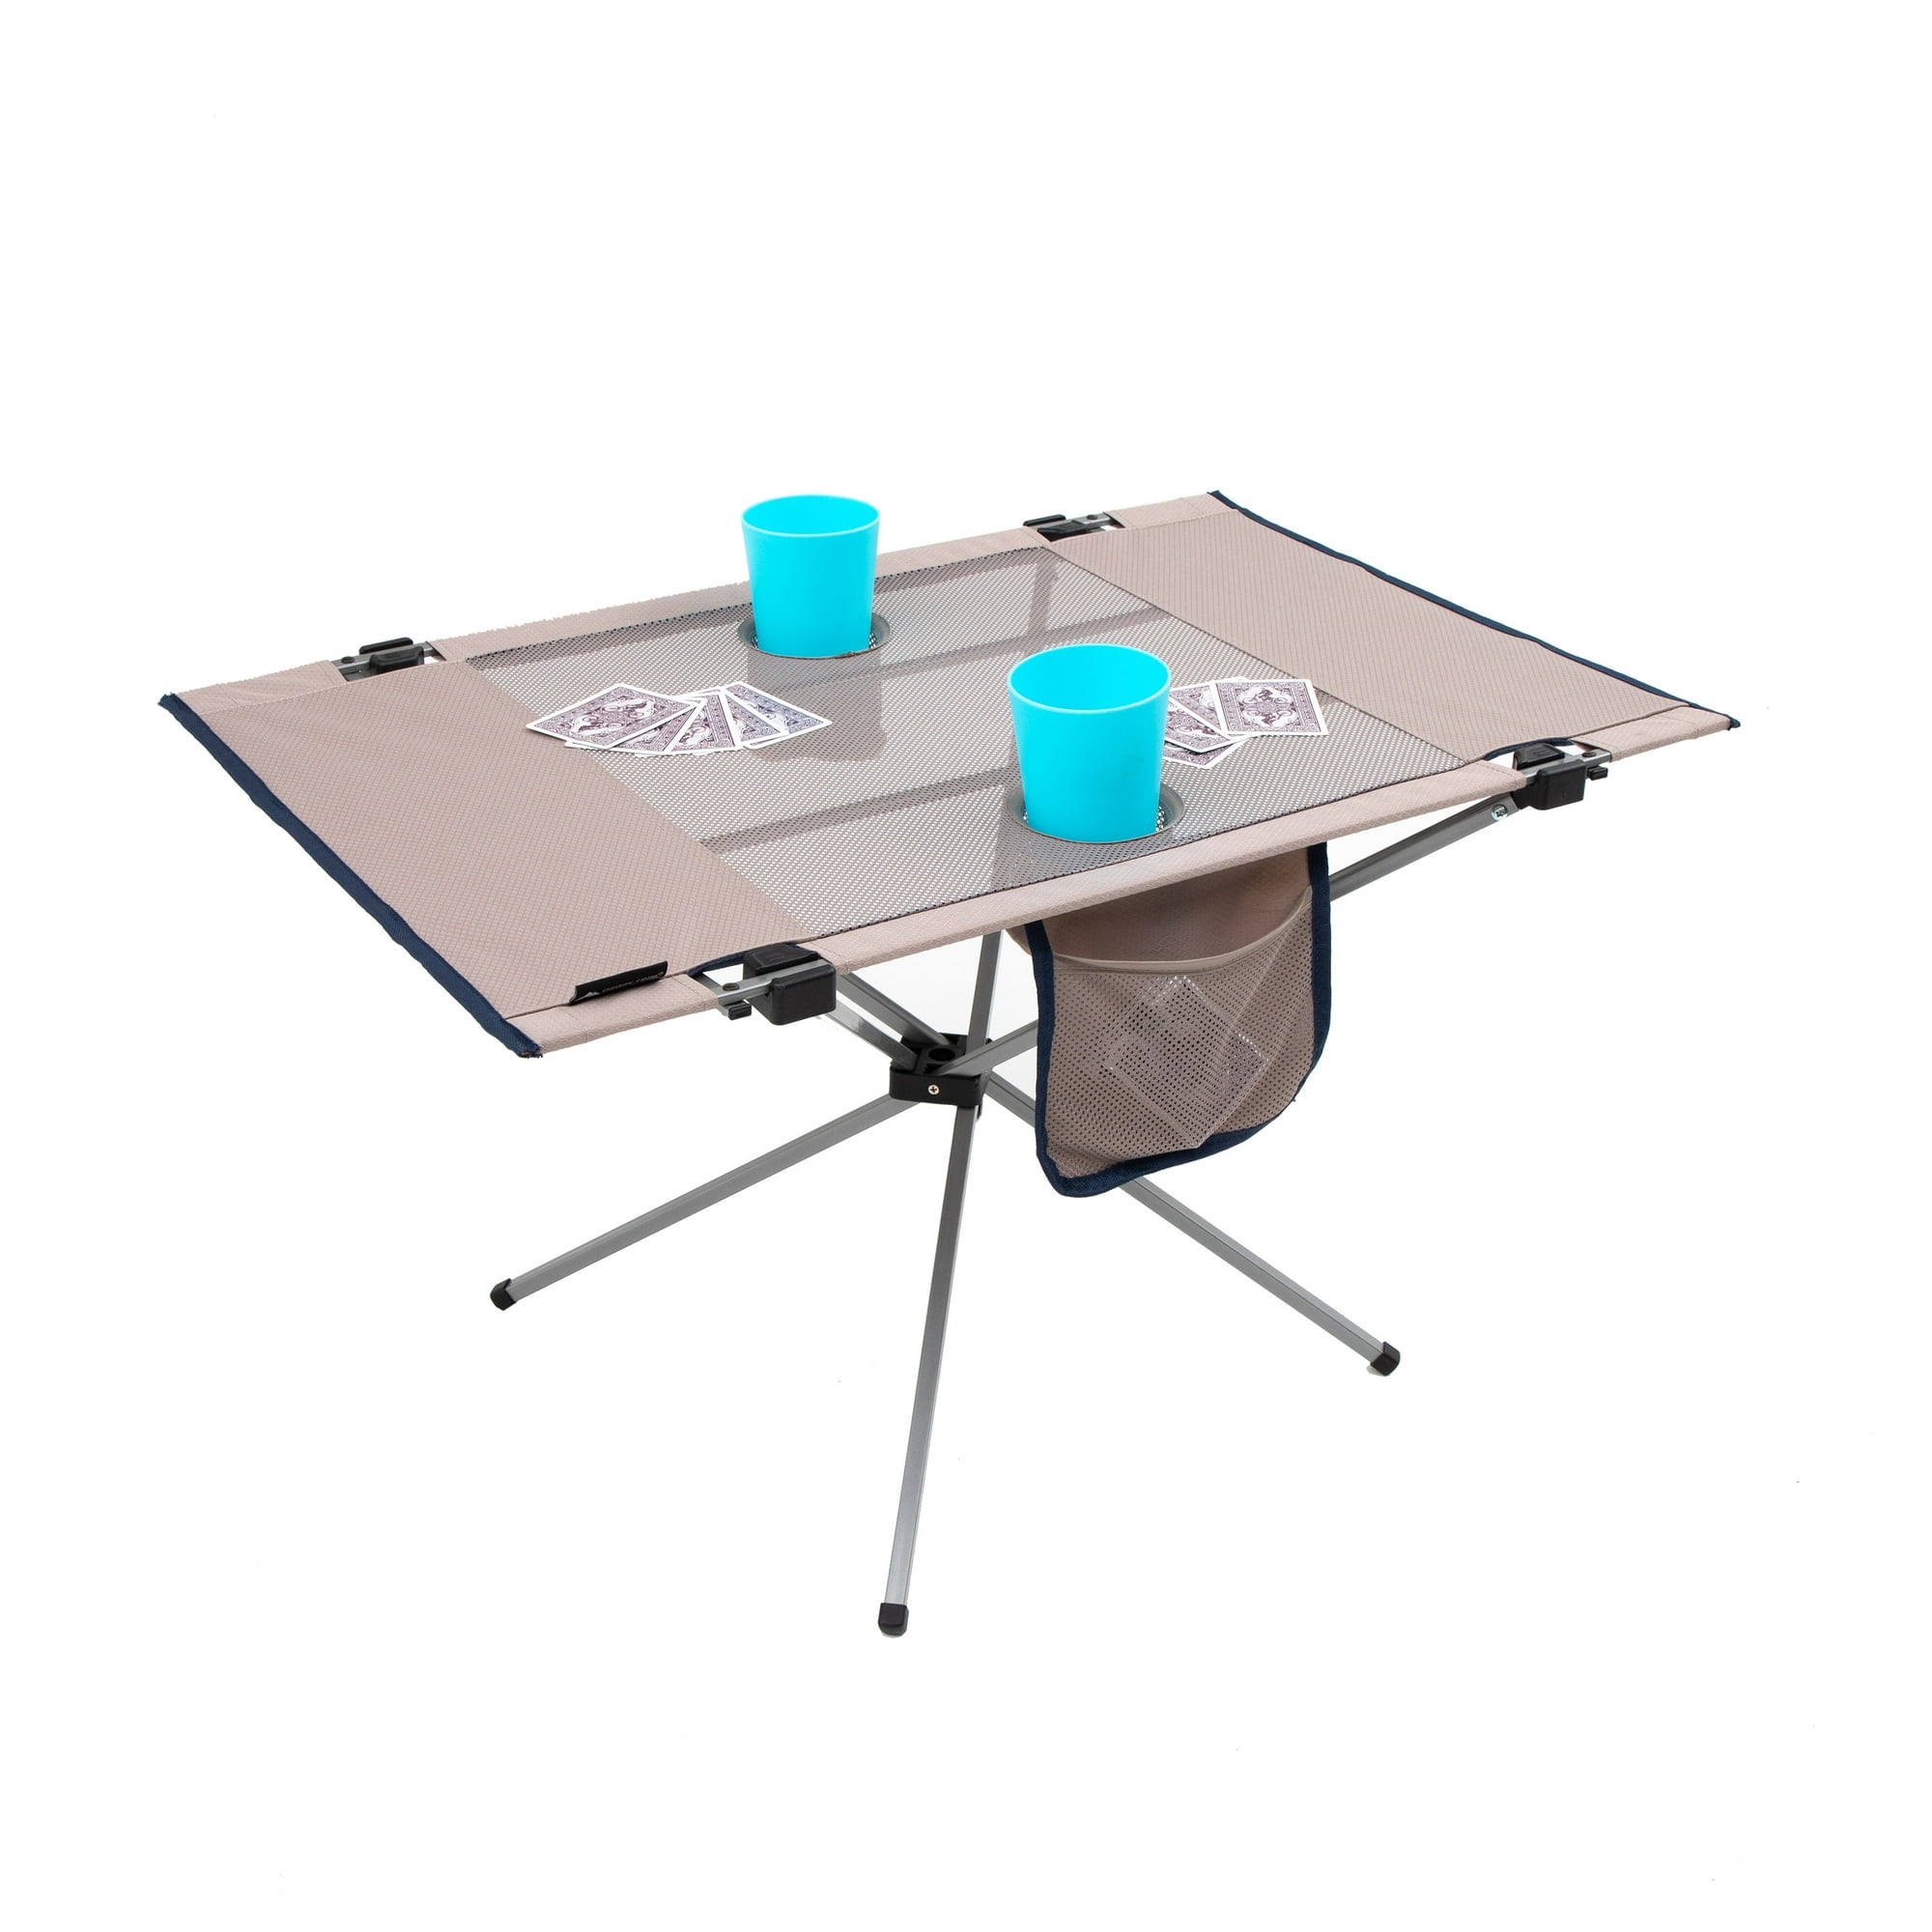 Ozark Trail Portable High-Tension Travel Table, Open Size 20.5 in x 31.5 in x 18.1 in